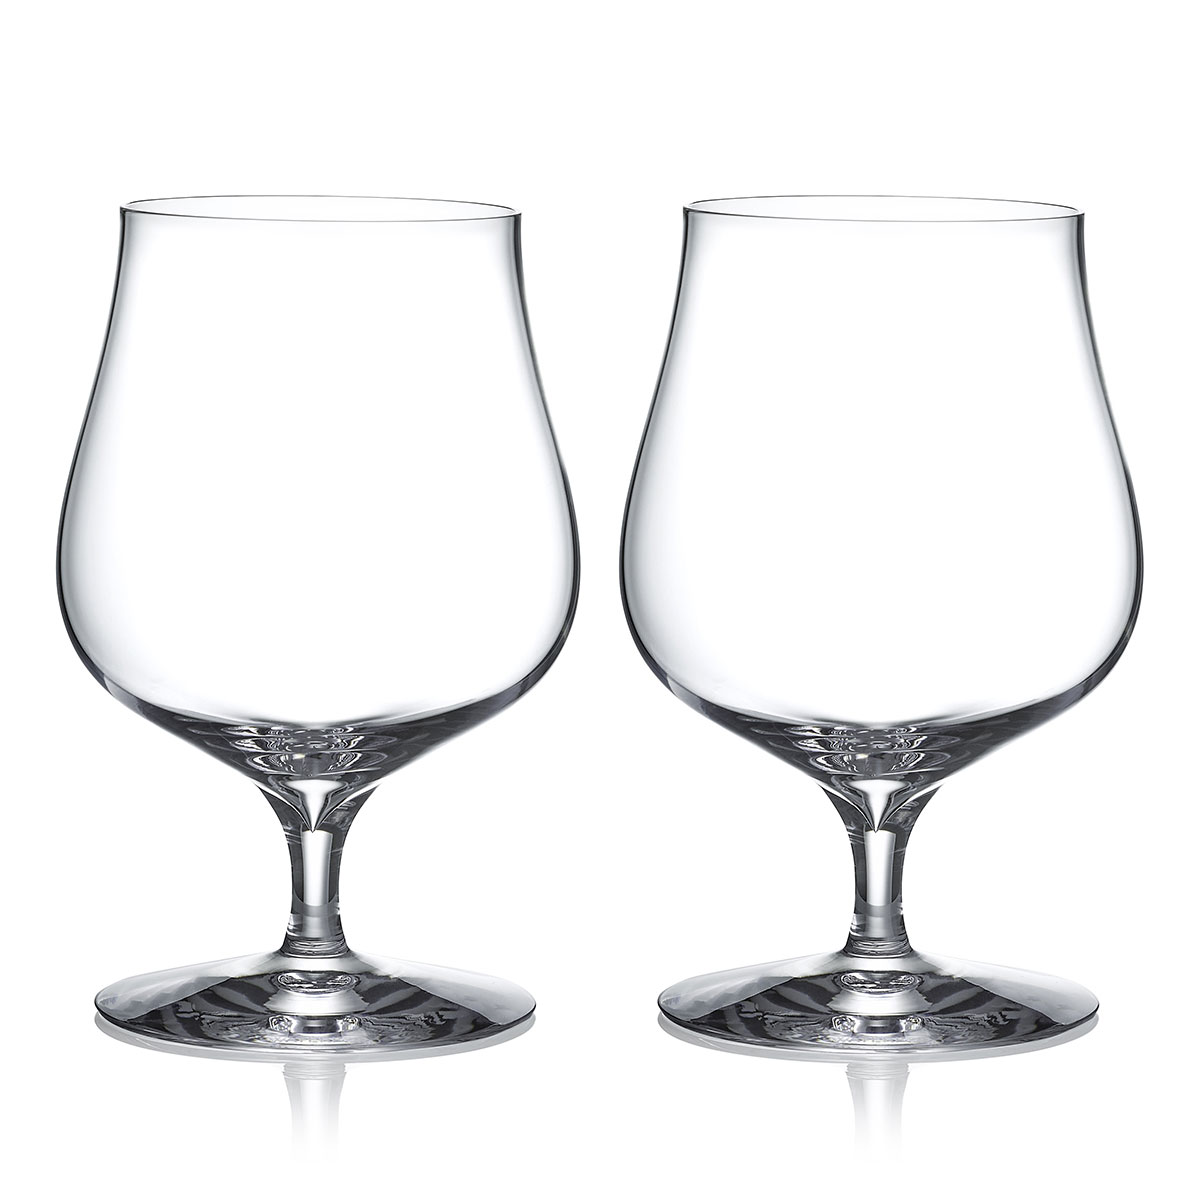 Waterford Craft Brew Snifter Glass, Pair